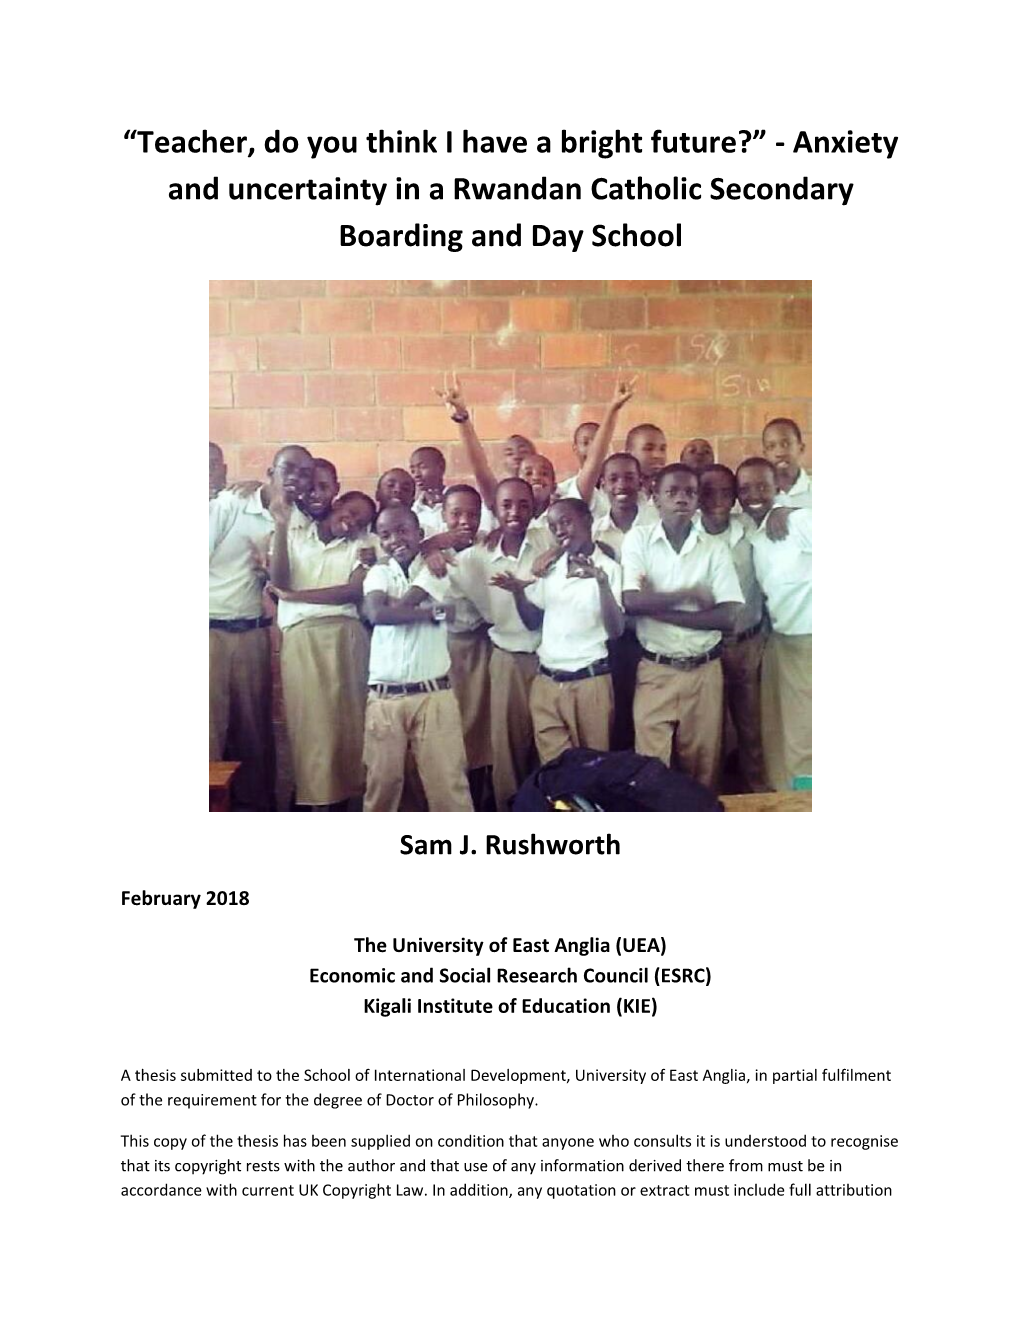 “Teacher, Do You Think I Have a Bright Future?” - Anxiety and Uncertainty in a Rwandan Catholic Secondary Boarding and Day School